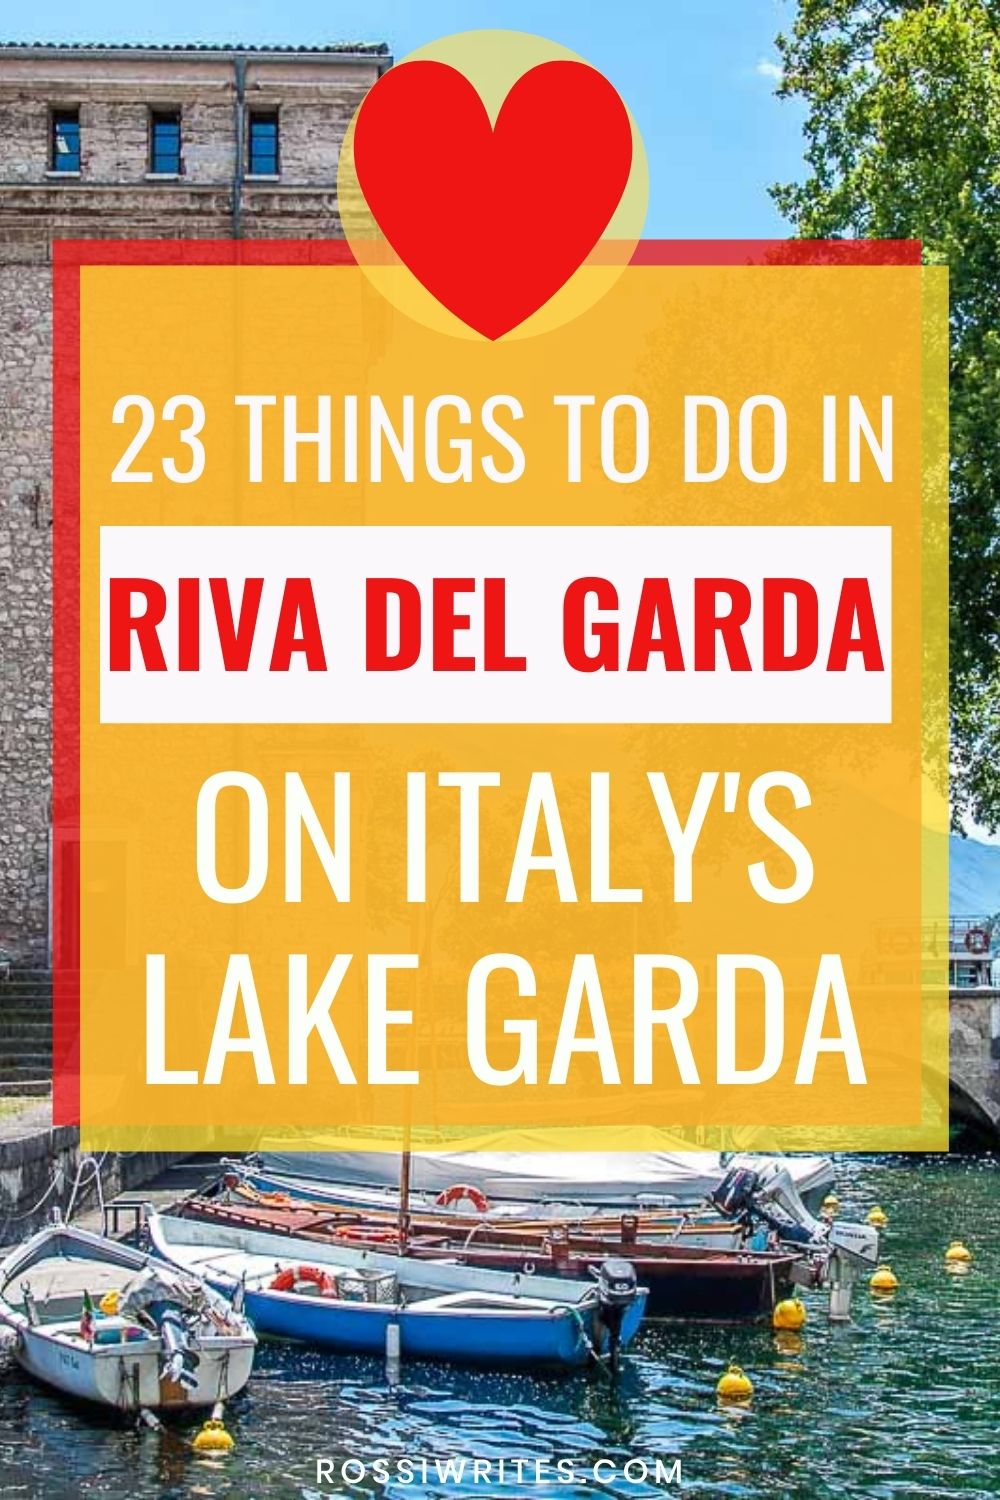 23 Best Things to Do in Riva del Garda on Lake Garda, Italy - rossiwrites.com